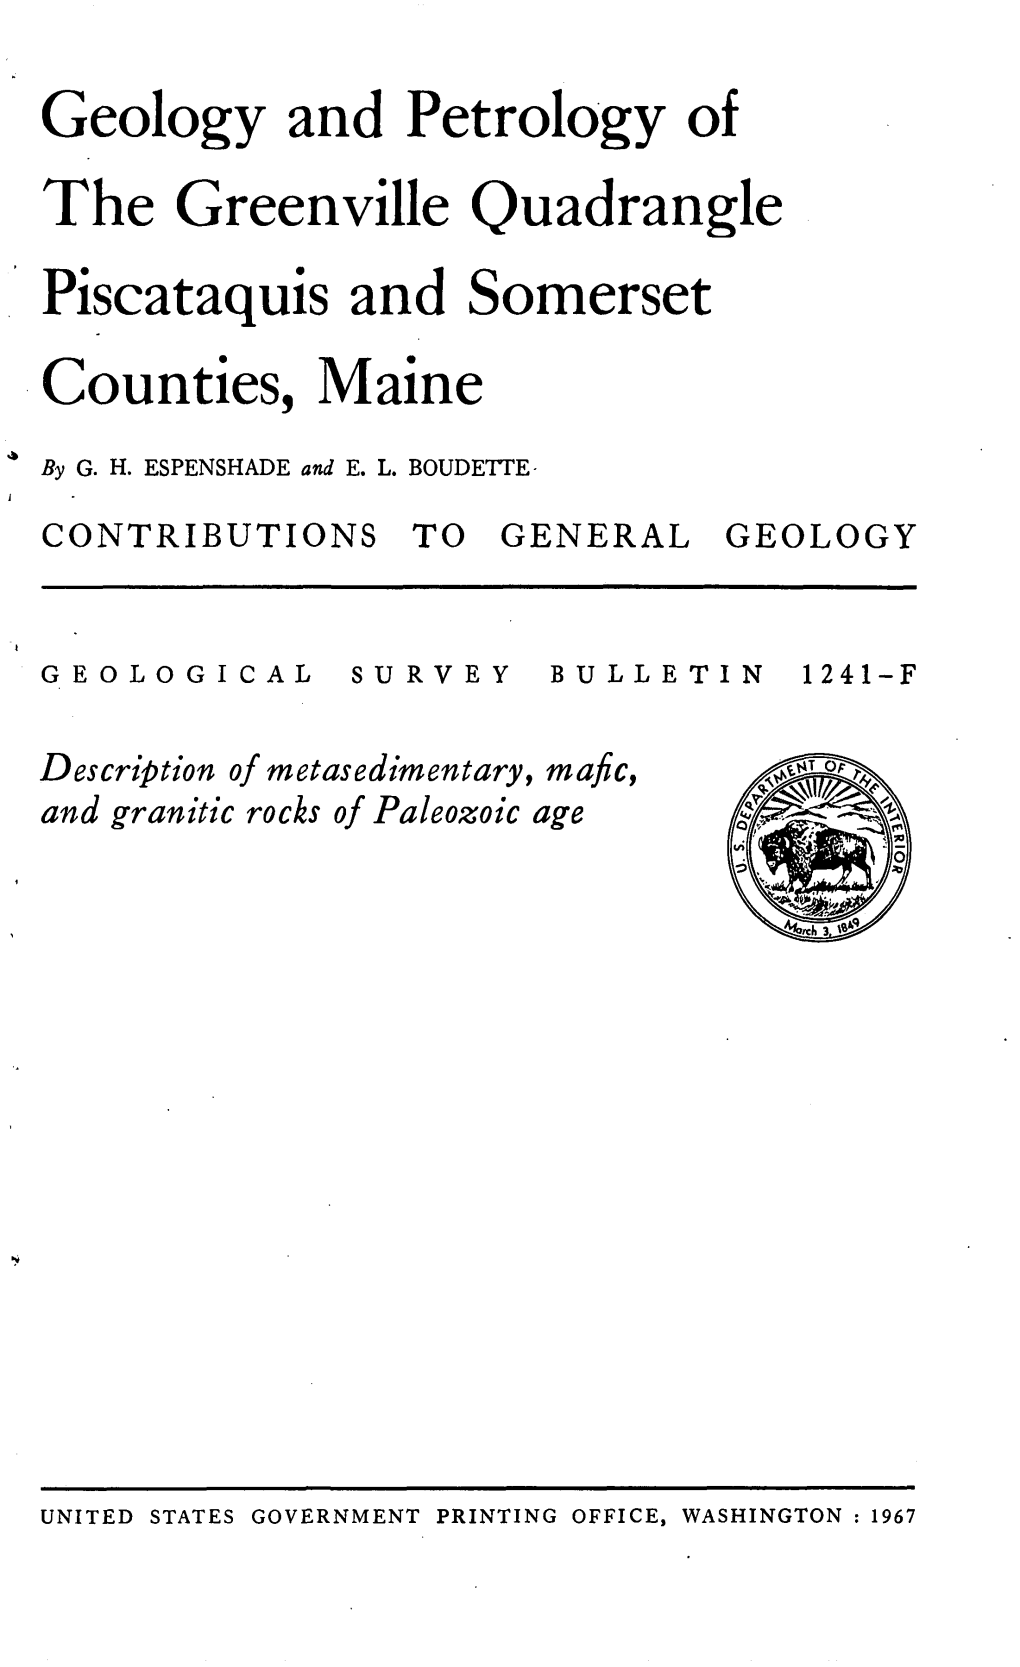 Geology and Petrology of the Greenville Quadrangle Piscataquis and Somerset Counties, Maine